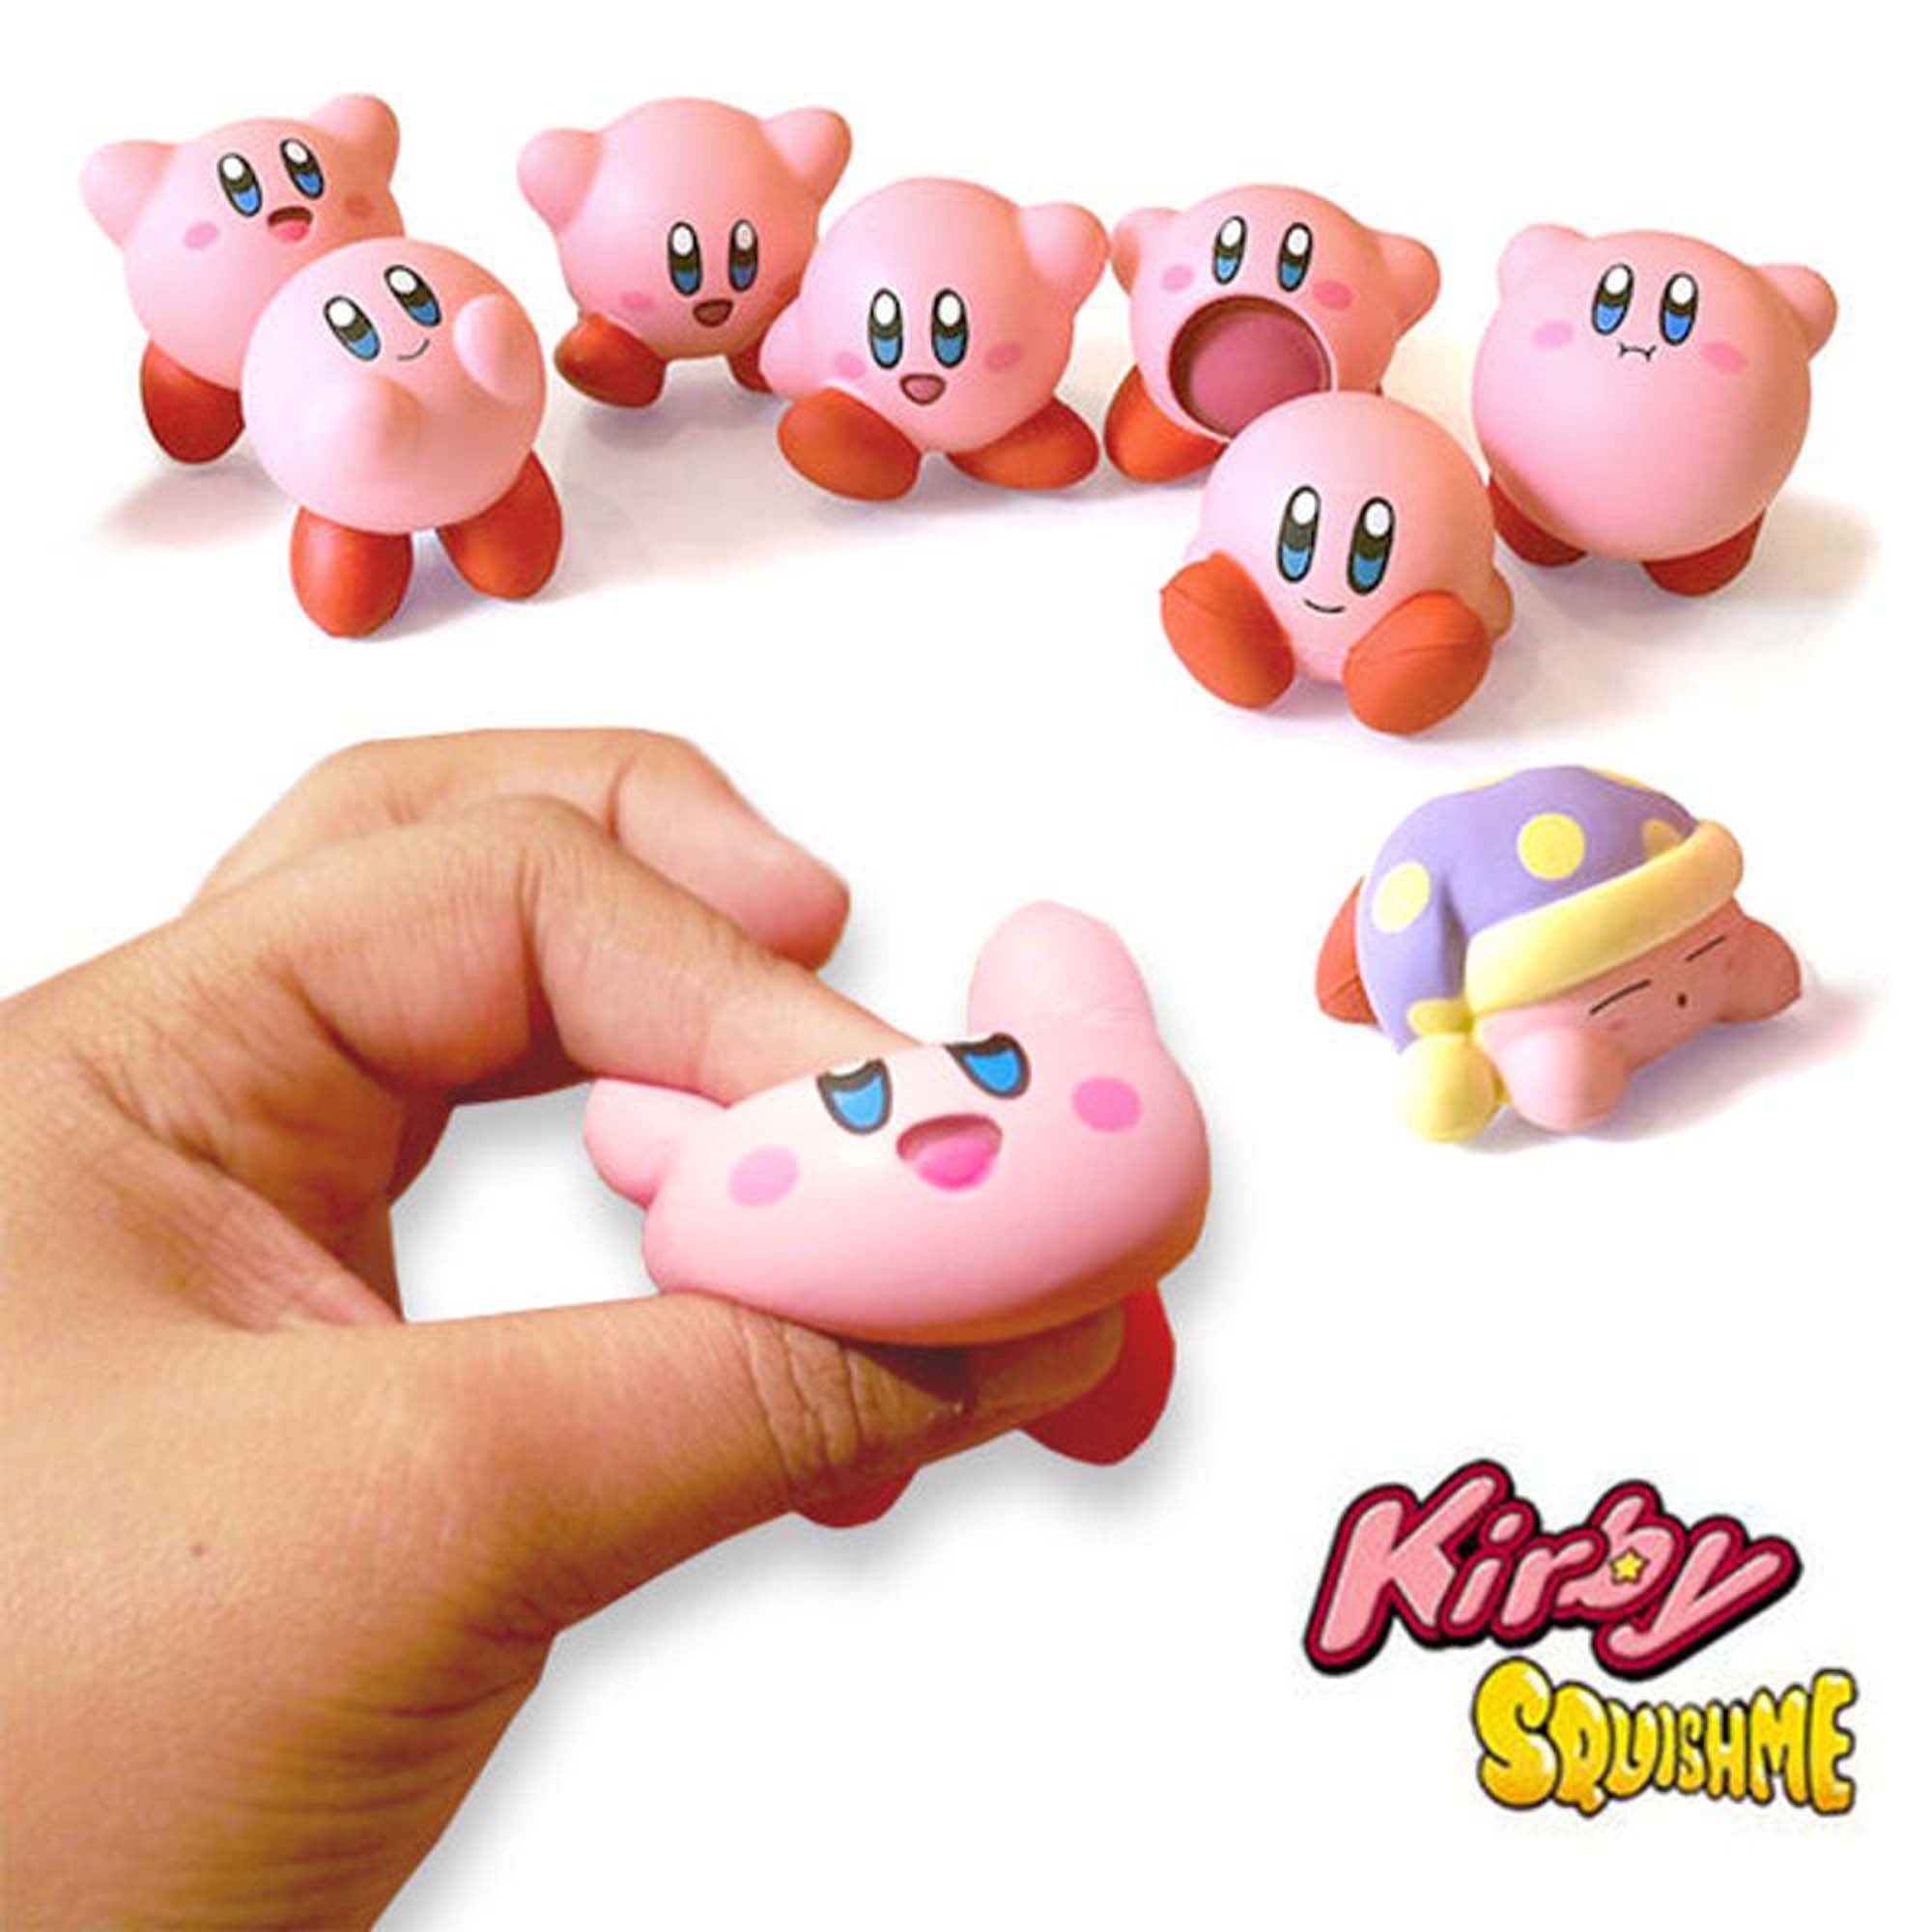 Just Toys Kirby SquishMe Stress Toy Series 1 (Styles May Vary)